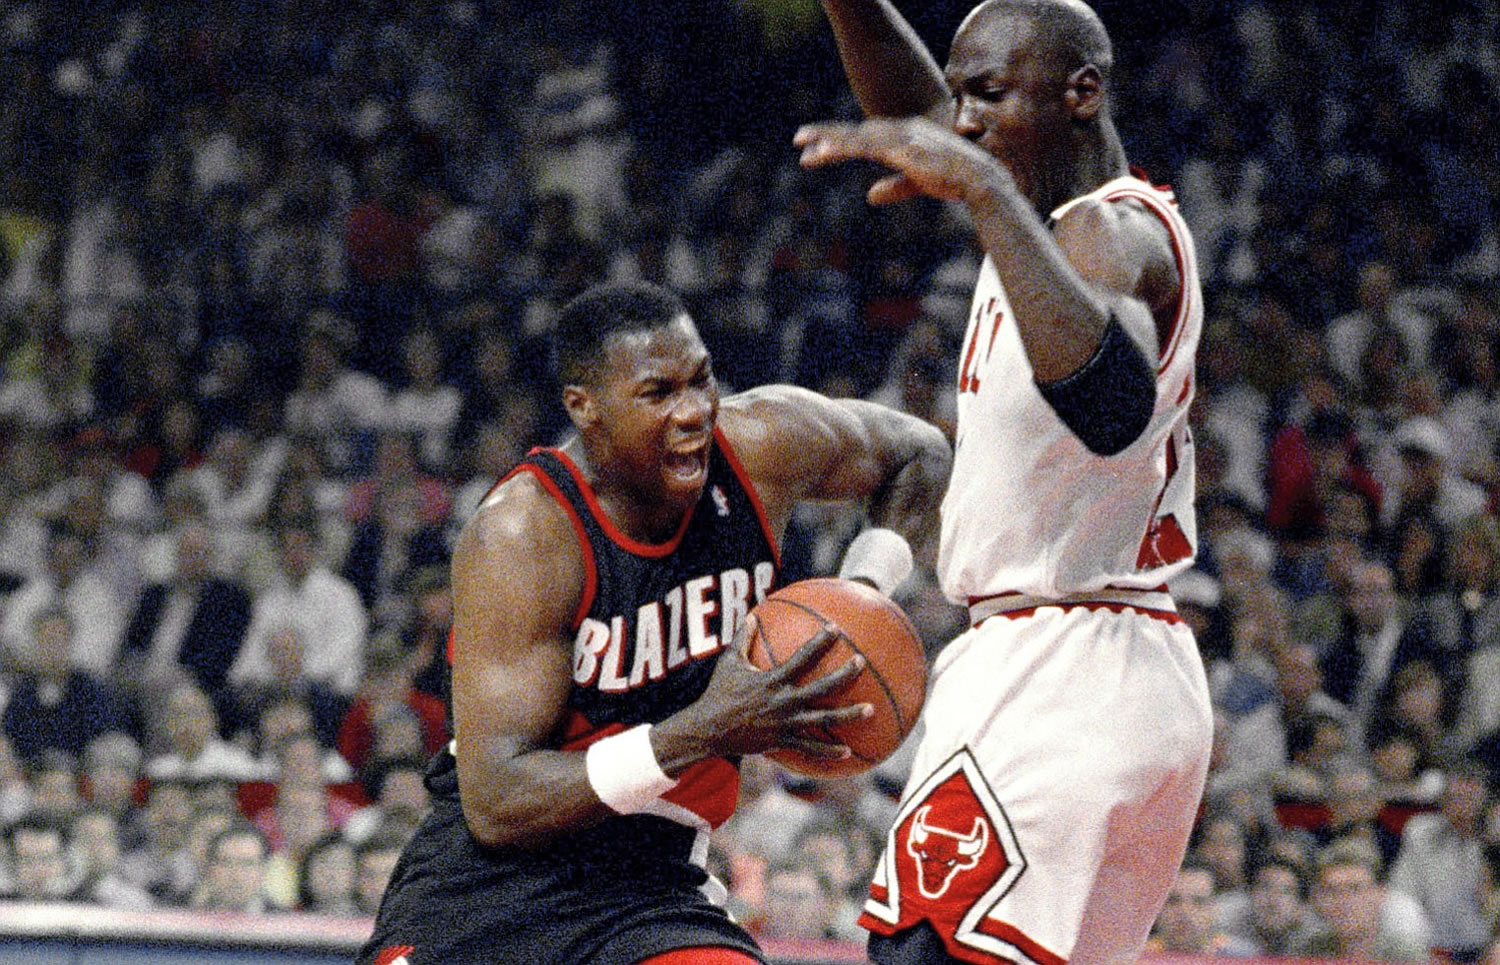 Chicago Bulls' Michael Jordan, right, tries to hold off Portland Trail Blazers' Jerome Kersey during Game 6 in basketball's NBA Finals in Chicago on June 14, 1992. Kersey, the small forward who played his first 11 NBA seasons with the Blazers and helped the San Antonio Spurs win the 1999 title, has died.